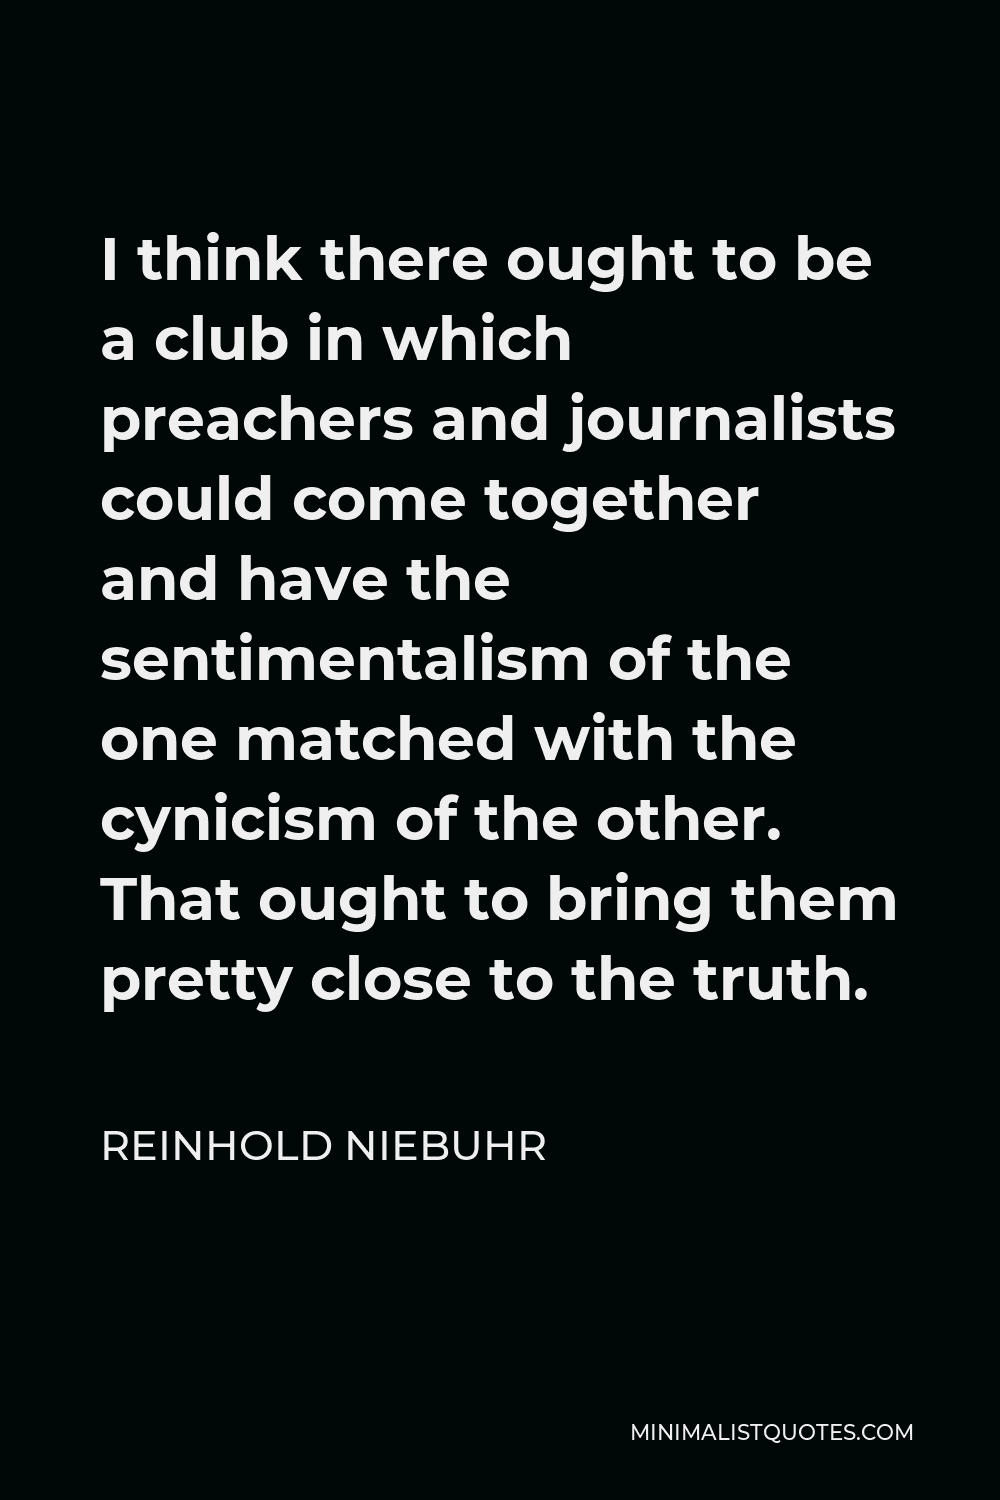 Reinhold Niebuhr Quote - I think there ought to be a club in which preachers and journalists could come together and have the sentimentalism of the one matched with the cynicism of the other. That ought to bring them pretty close to the truth.